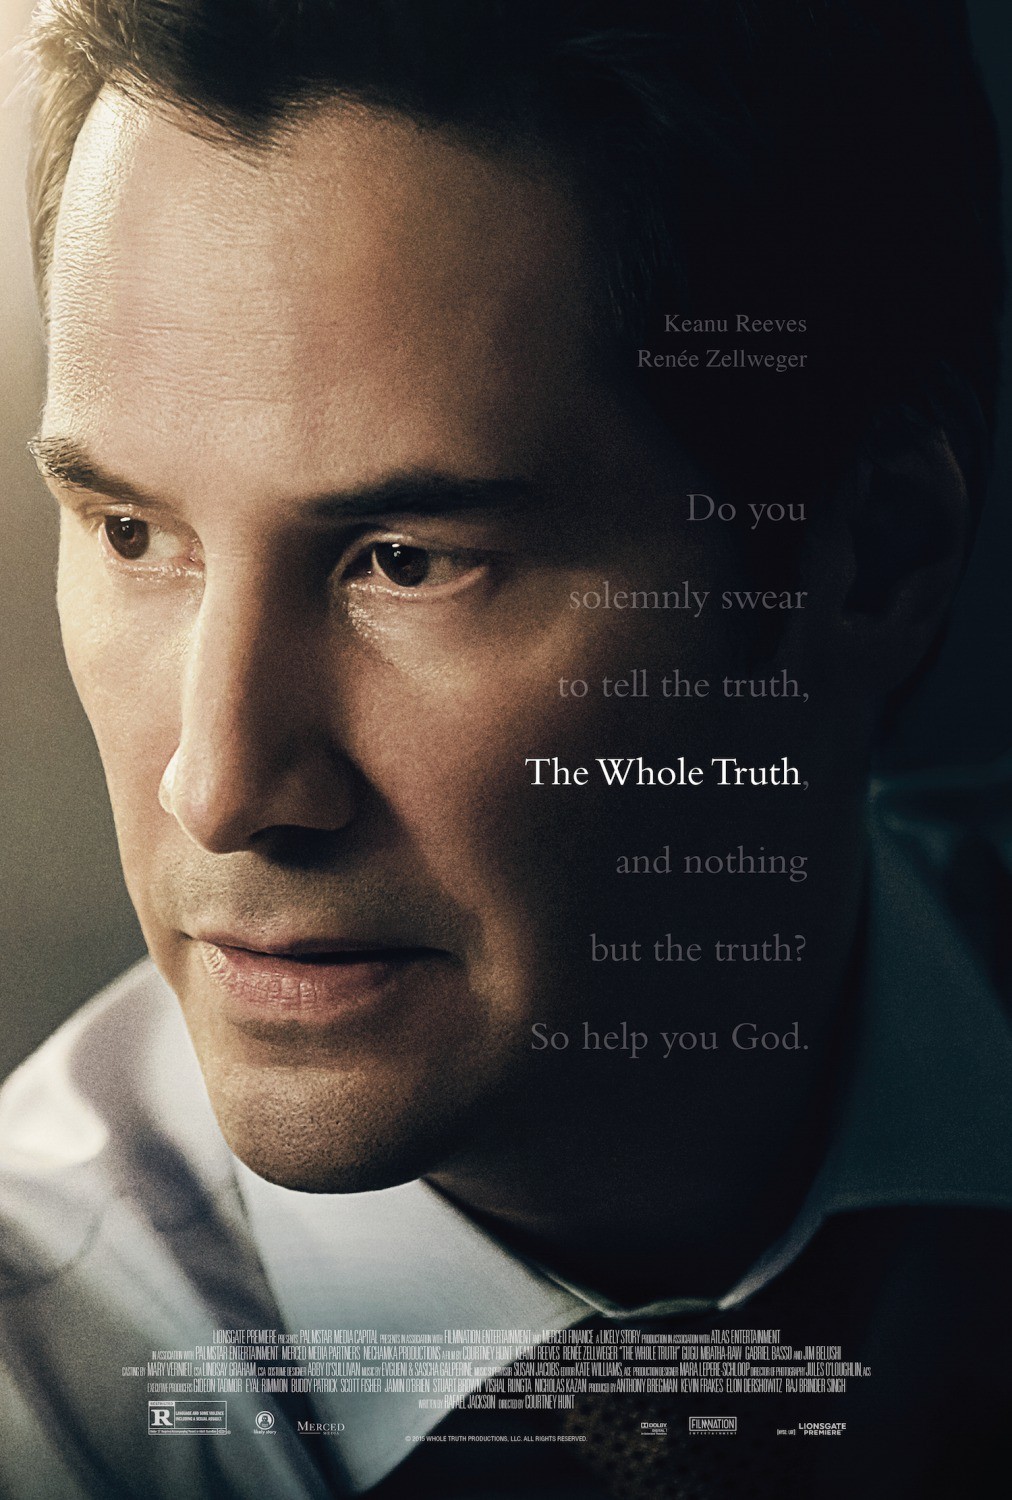 the-whole-truth-trailer-e-poster-del-thriller-con-keanu-reeves-e-renee-zellweger-2.jpg